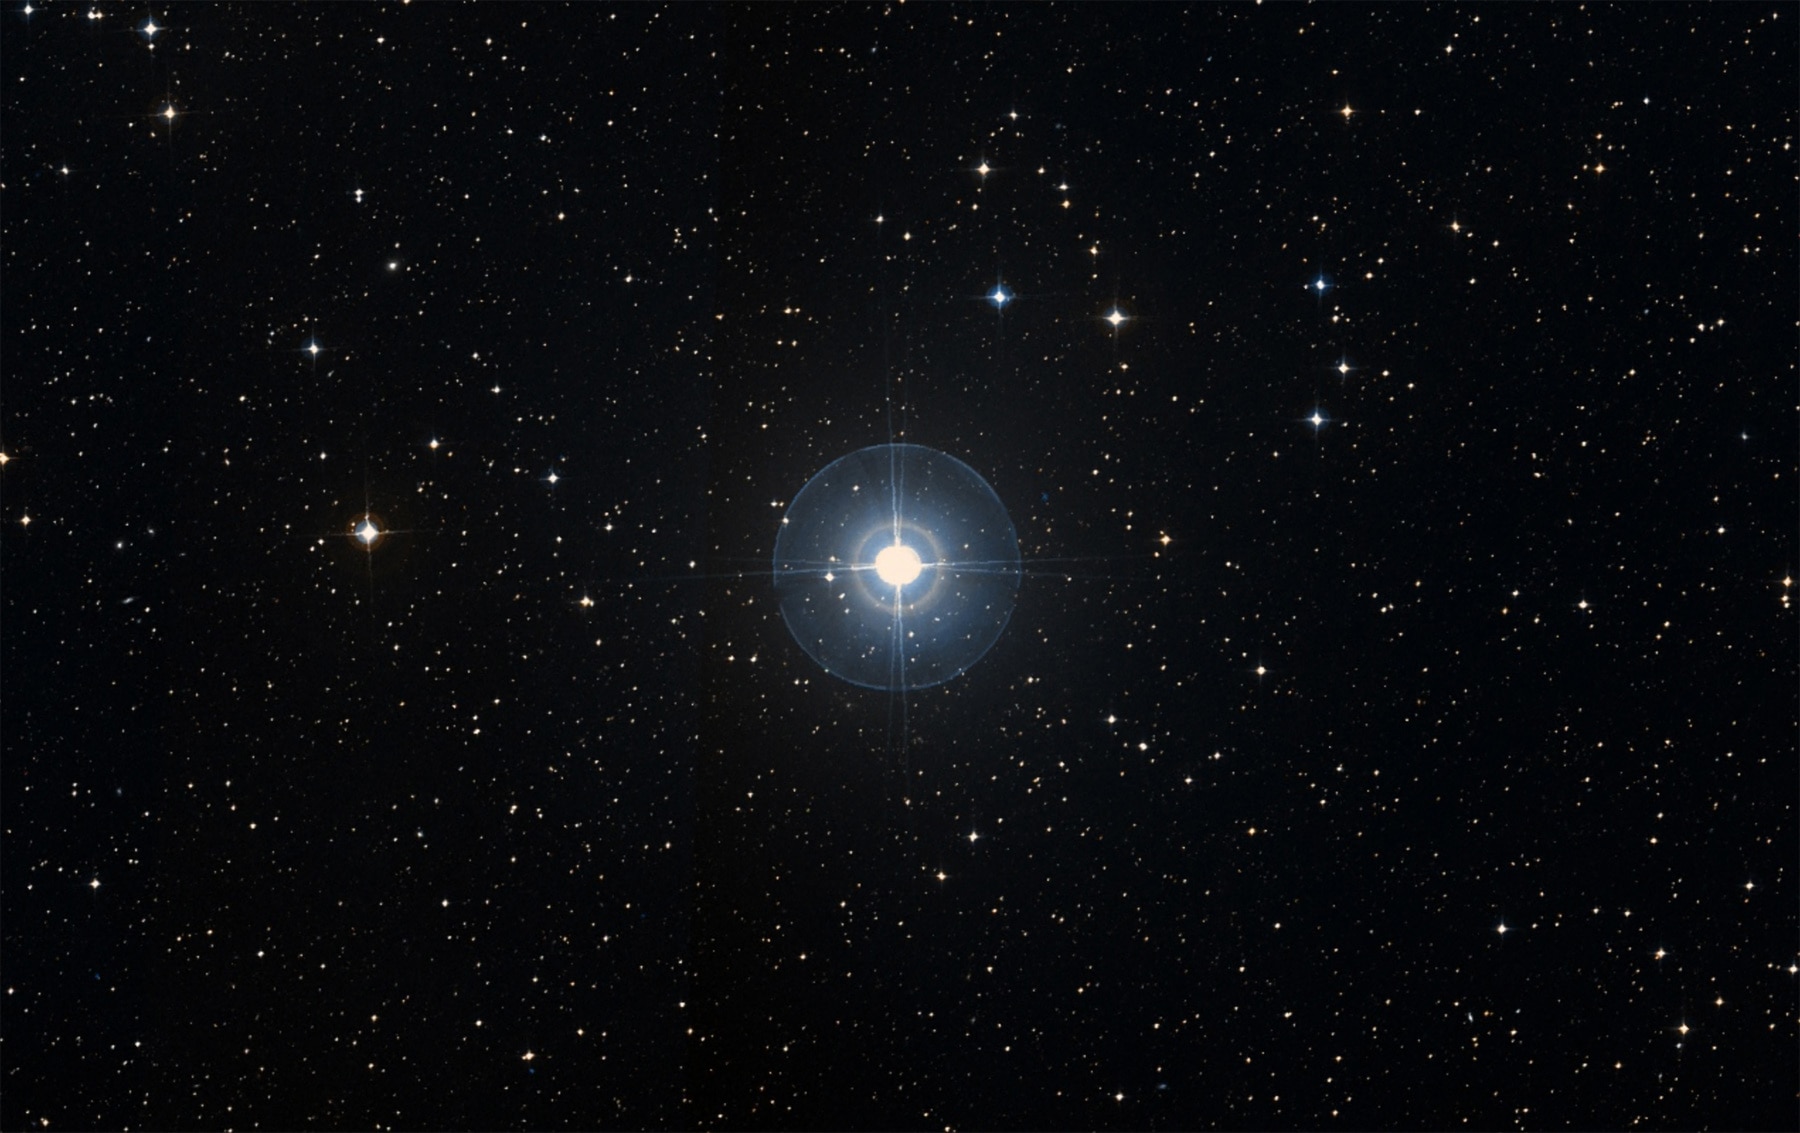 Beta Pictoris (centered; the rings and lines are image artifacts caused by the telescope) is a young nearby star with a disk of dust and at least two planets orbiting it. Credit: SIMBAD / DSS